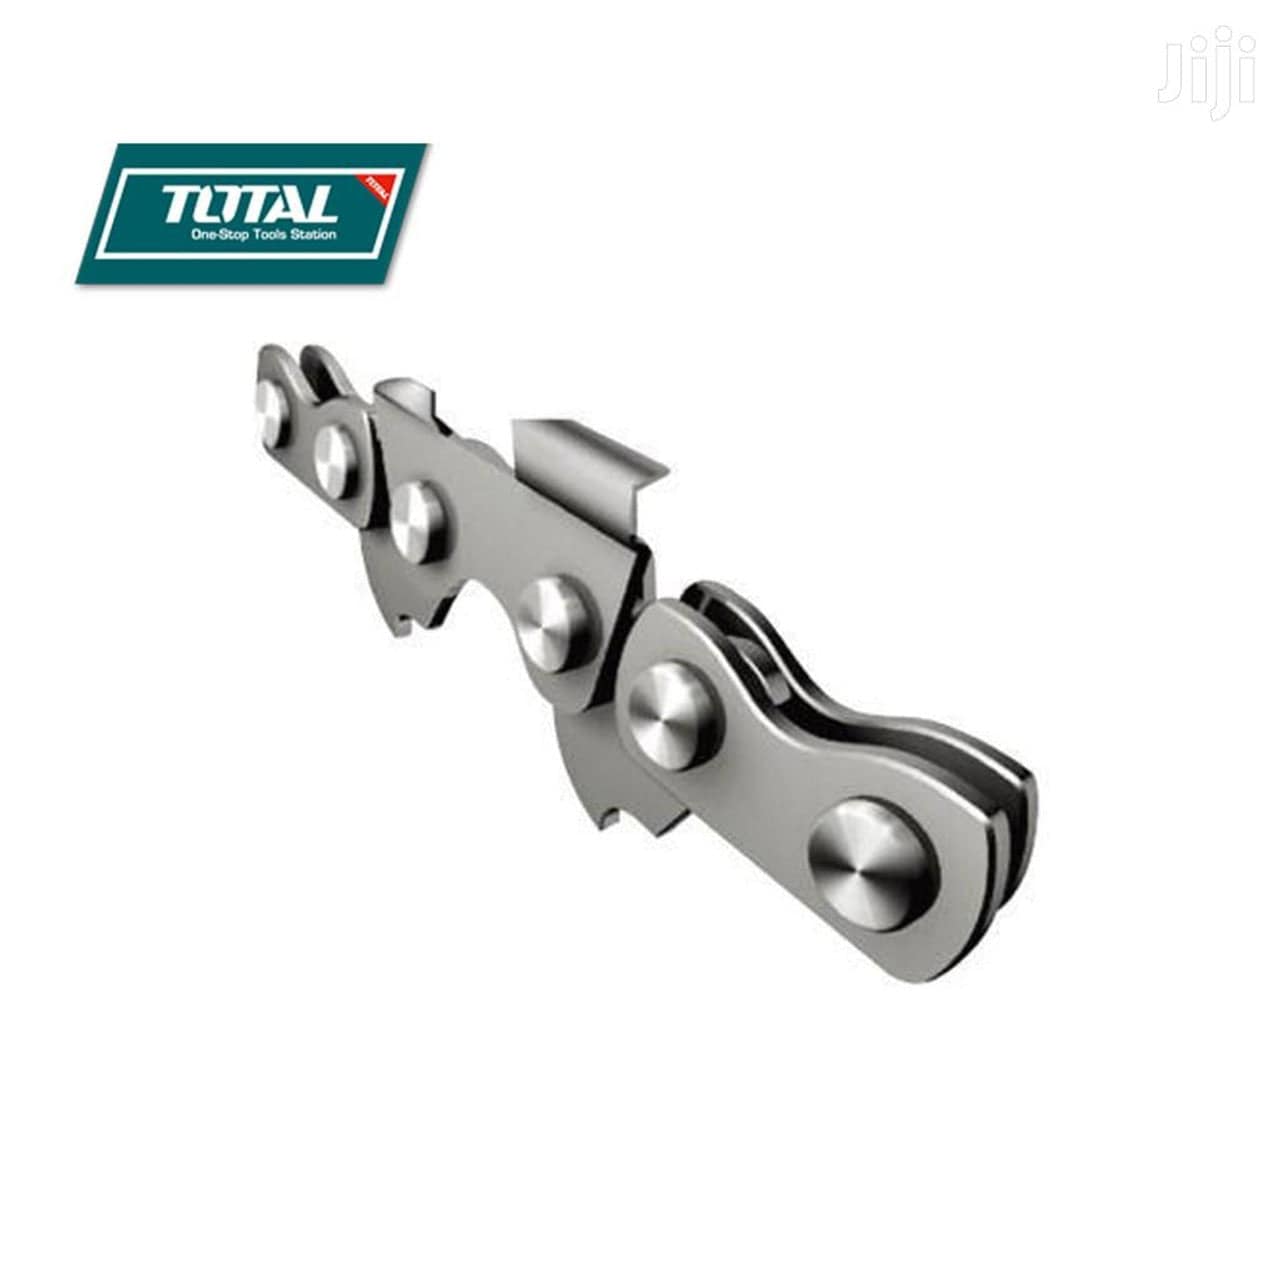 Total Saw Chain 24" - TGTSC52401 | Supply Master | Accra, Ghana Chainsaw Buy Tools hardware Building materials